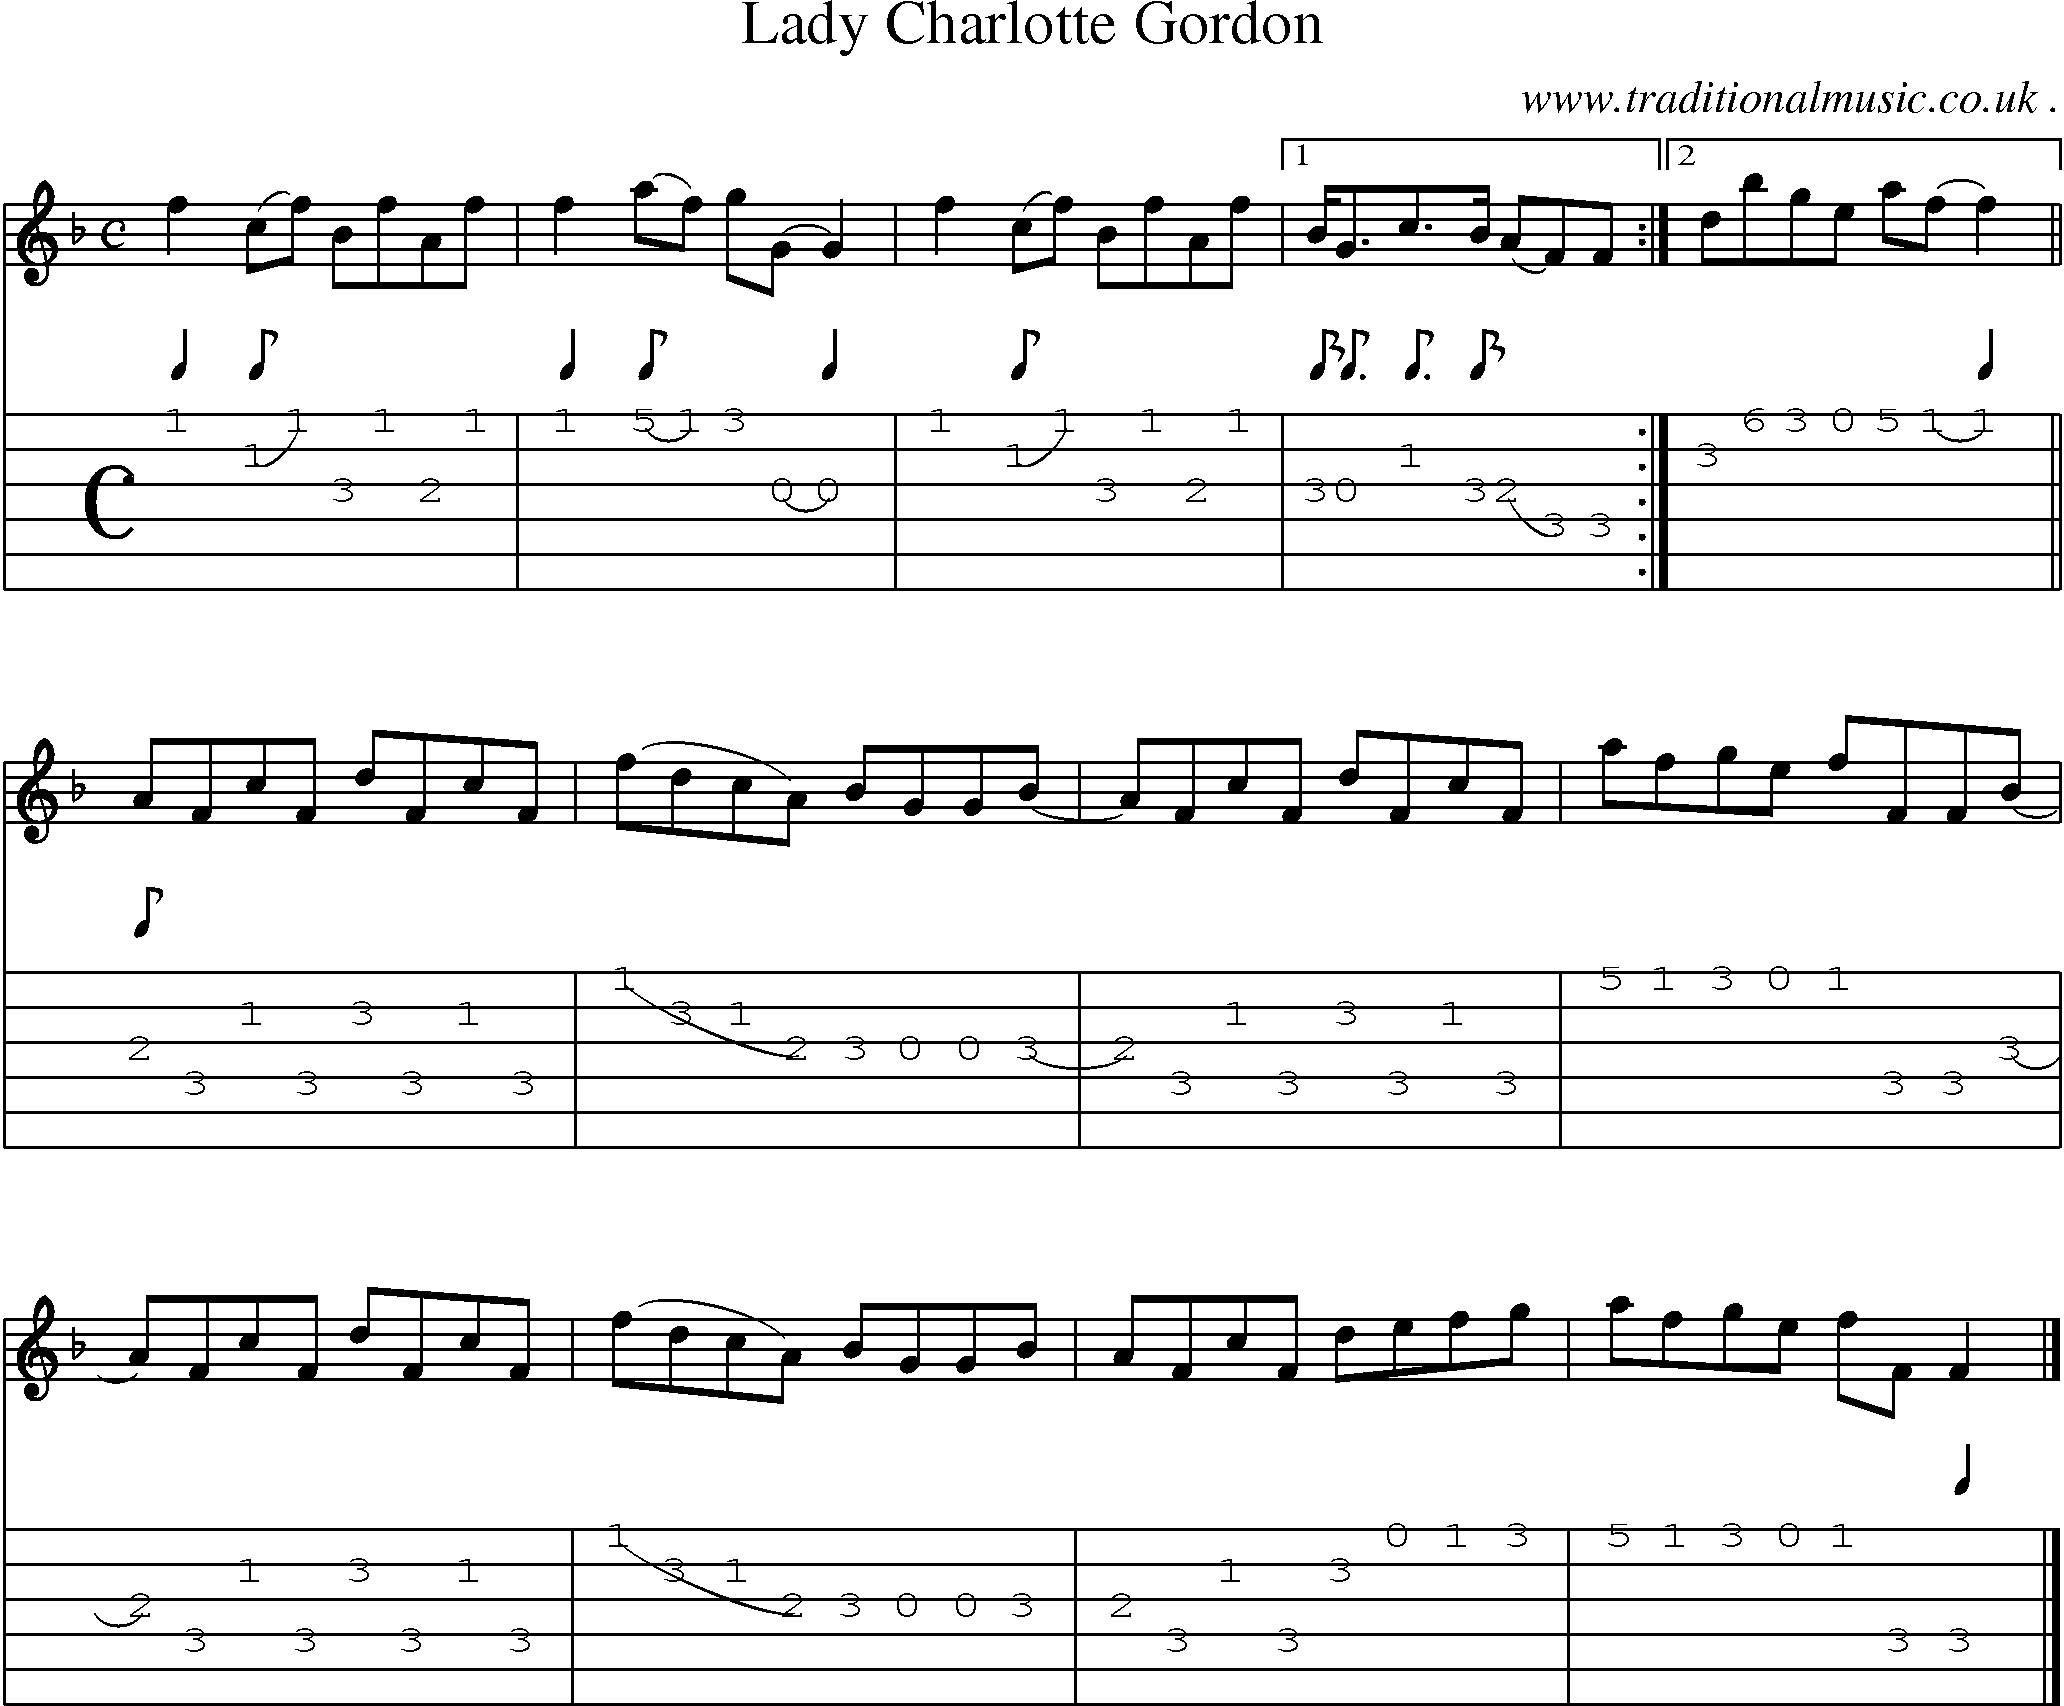 Sheet-music  score, Chords and Guitar Tabs for Lady Charlotte Gordon